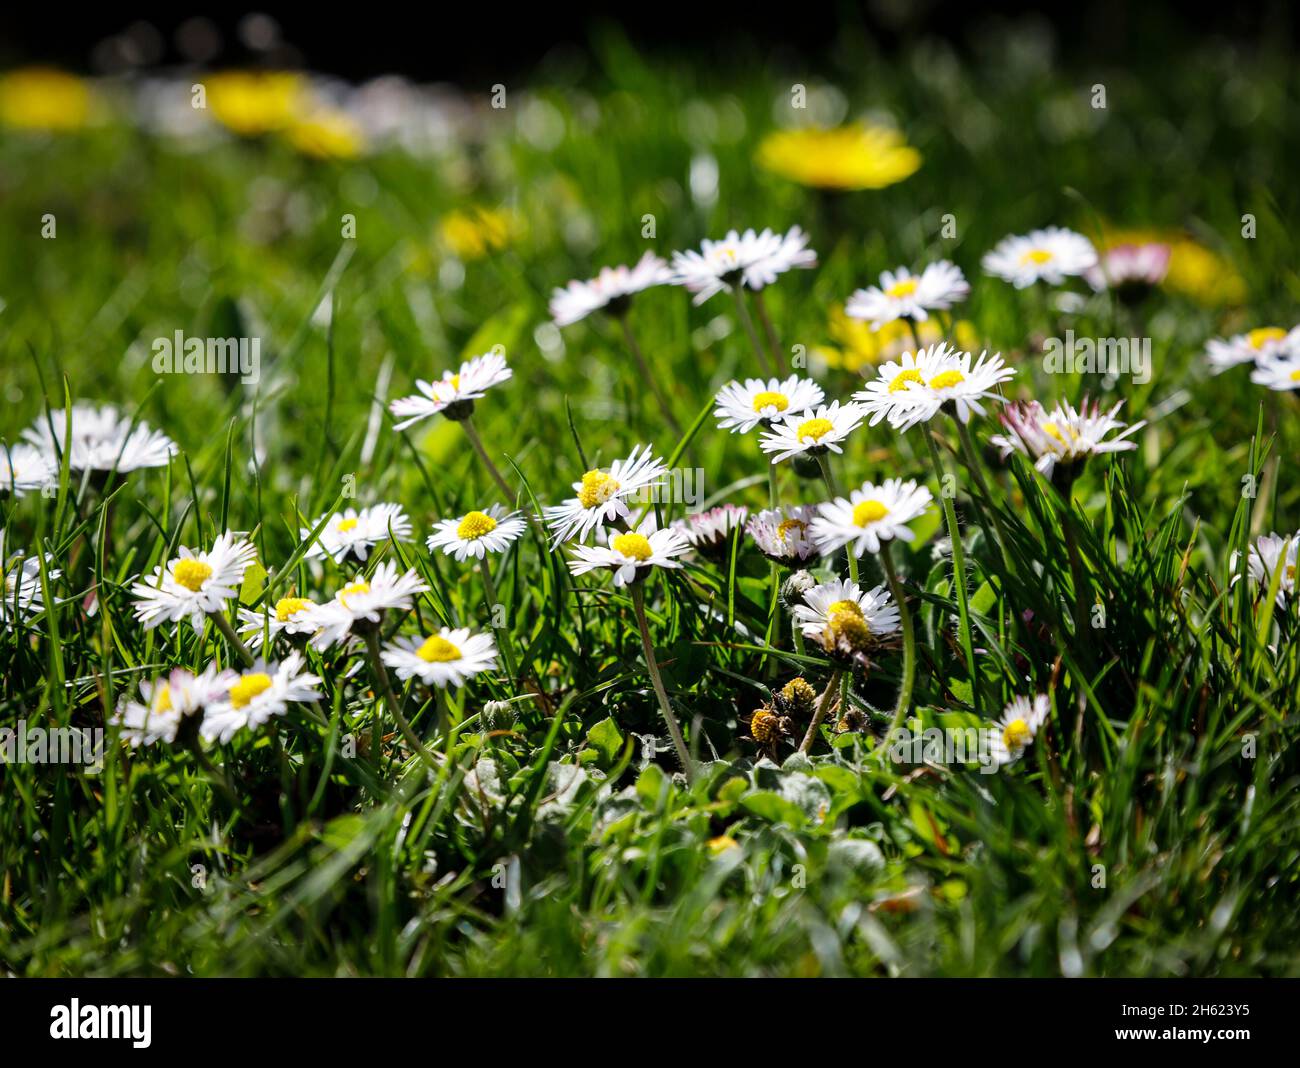 daisies in the lush and green grass Stock Photo